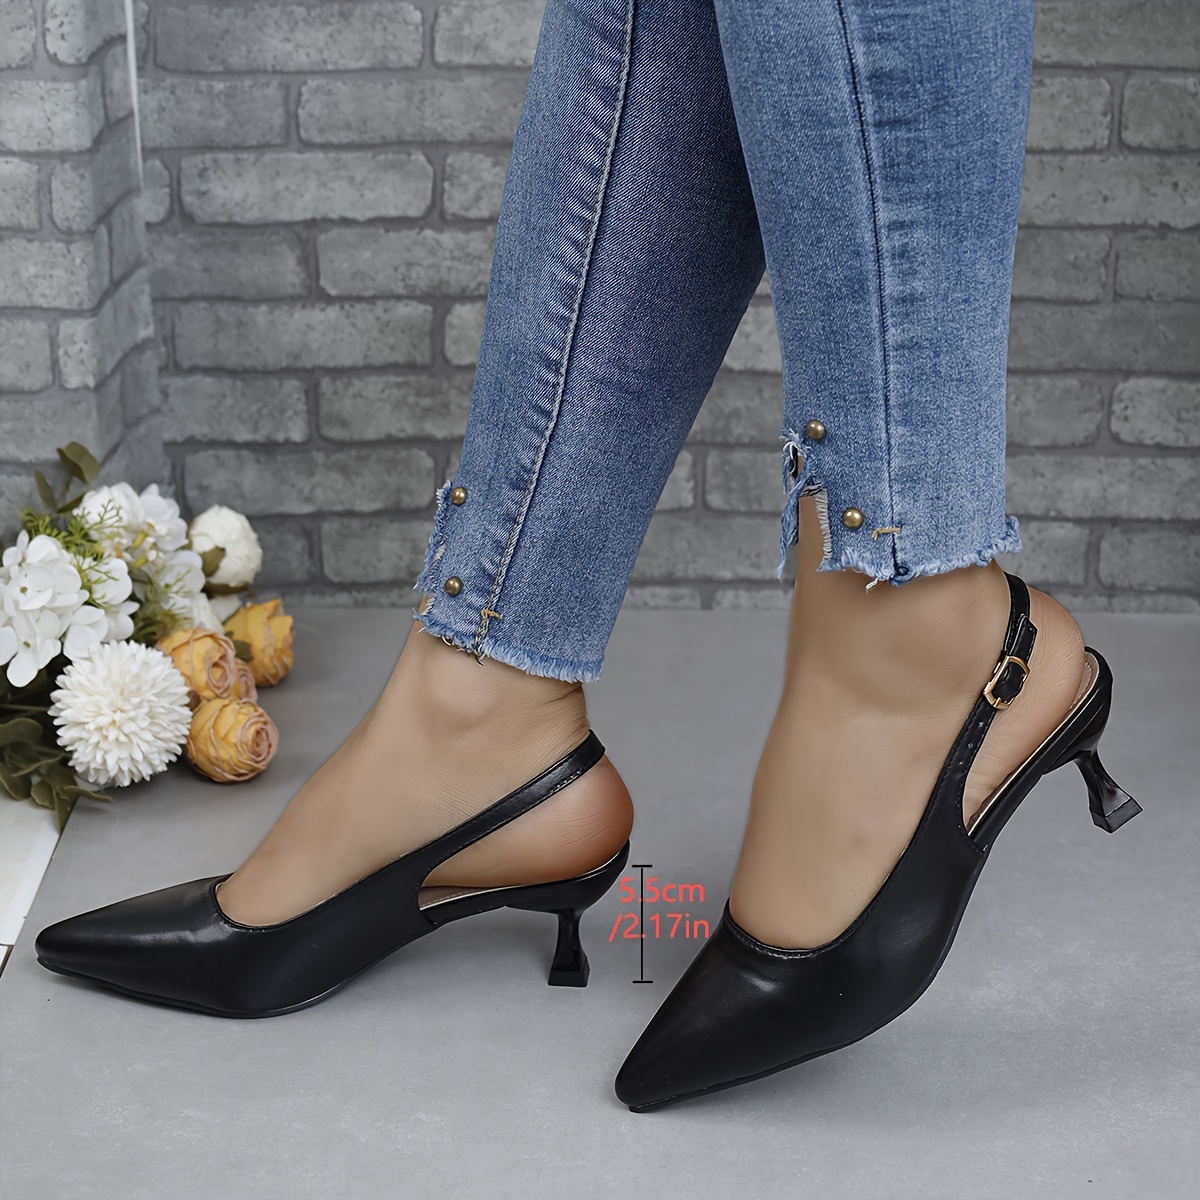 

Women's Solid Color Stylish Summer Shoes, Ankle Buckle Strap Slip On Slingback Versatile Shoes, Point Toe Party Shoes